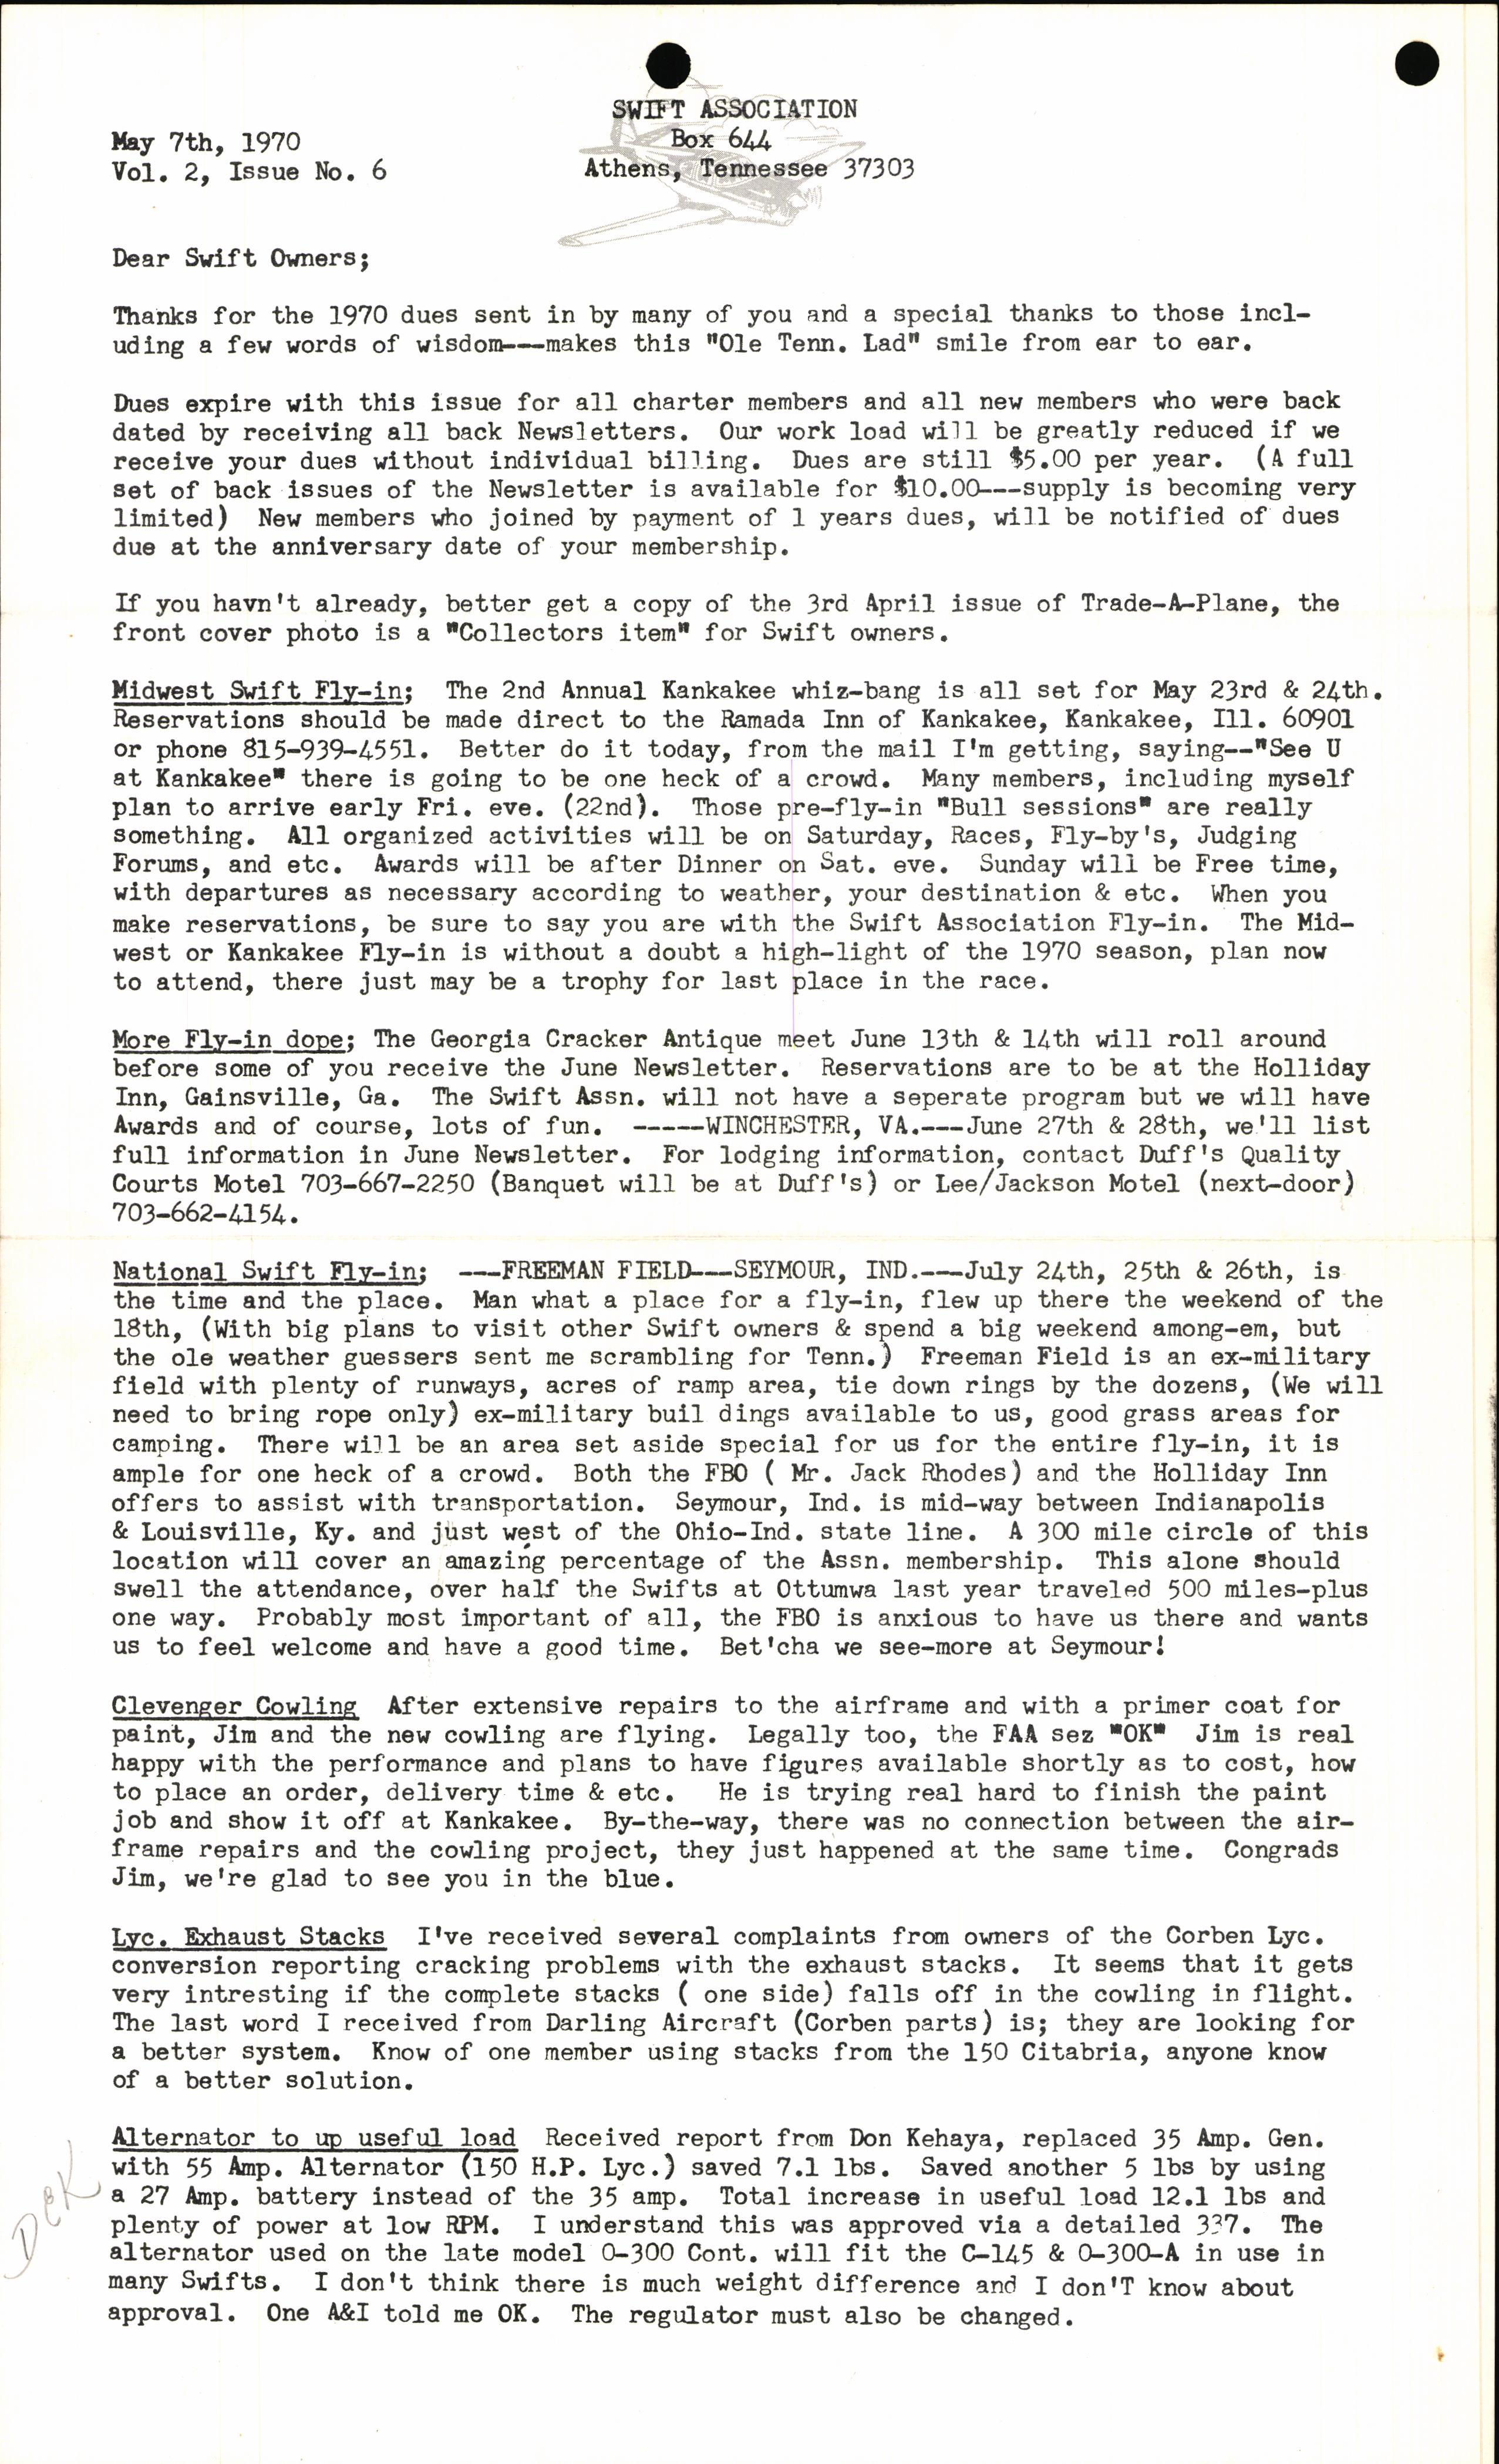 Sample page 1 from AirCorps Library document: May 1970